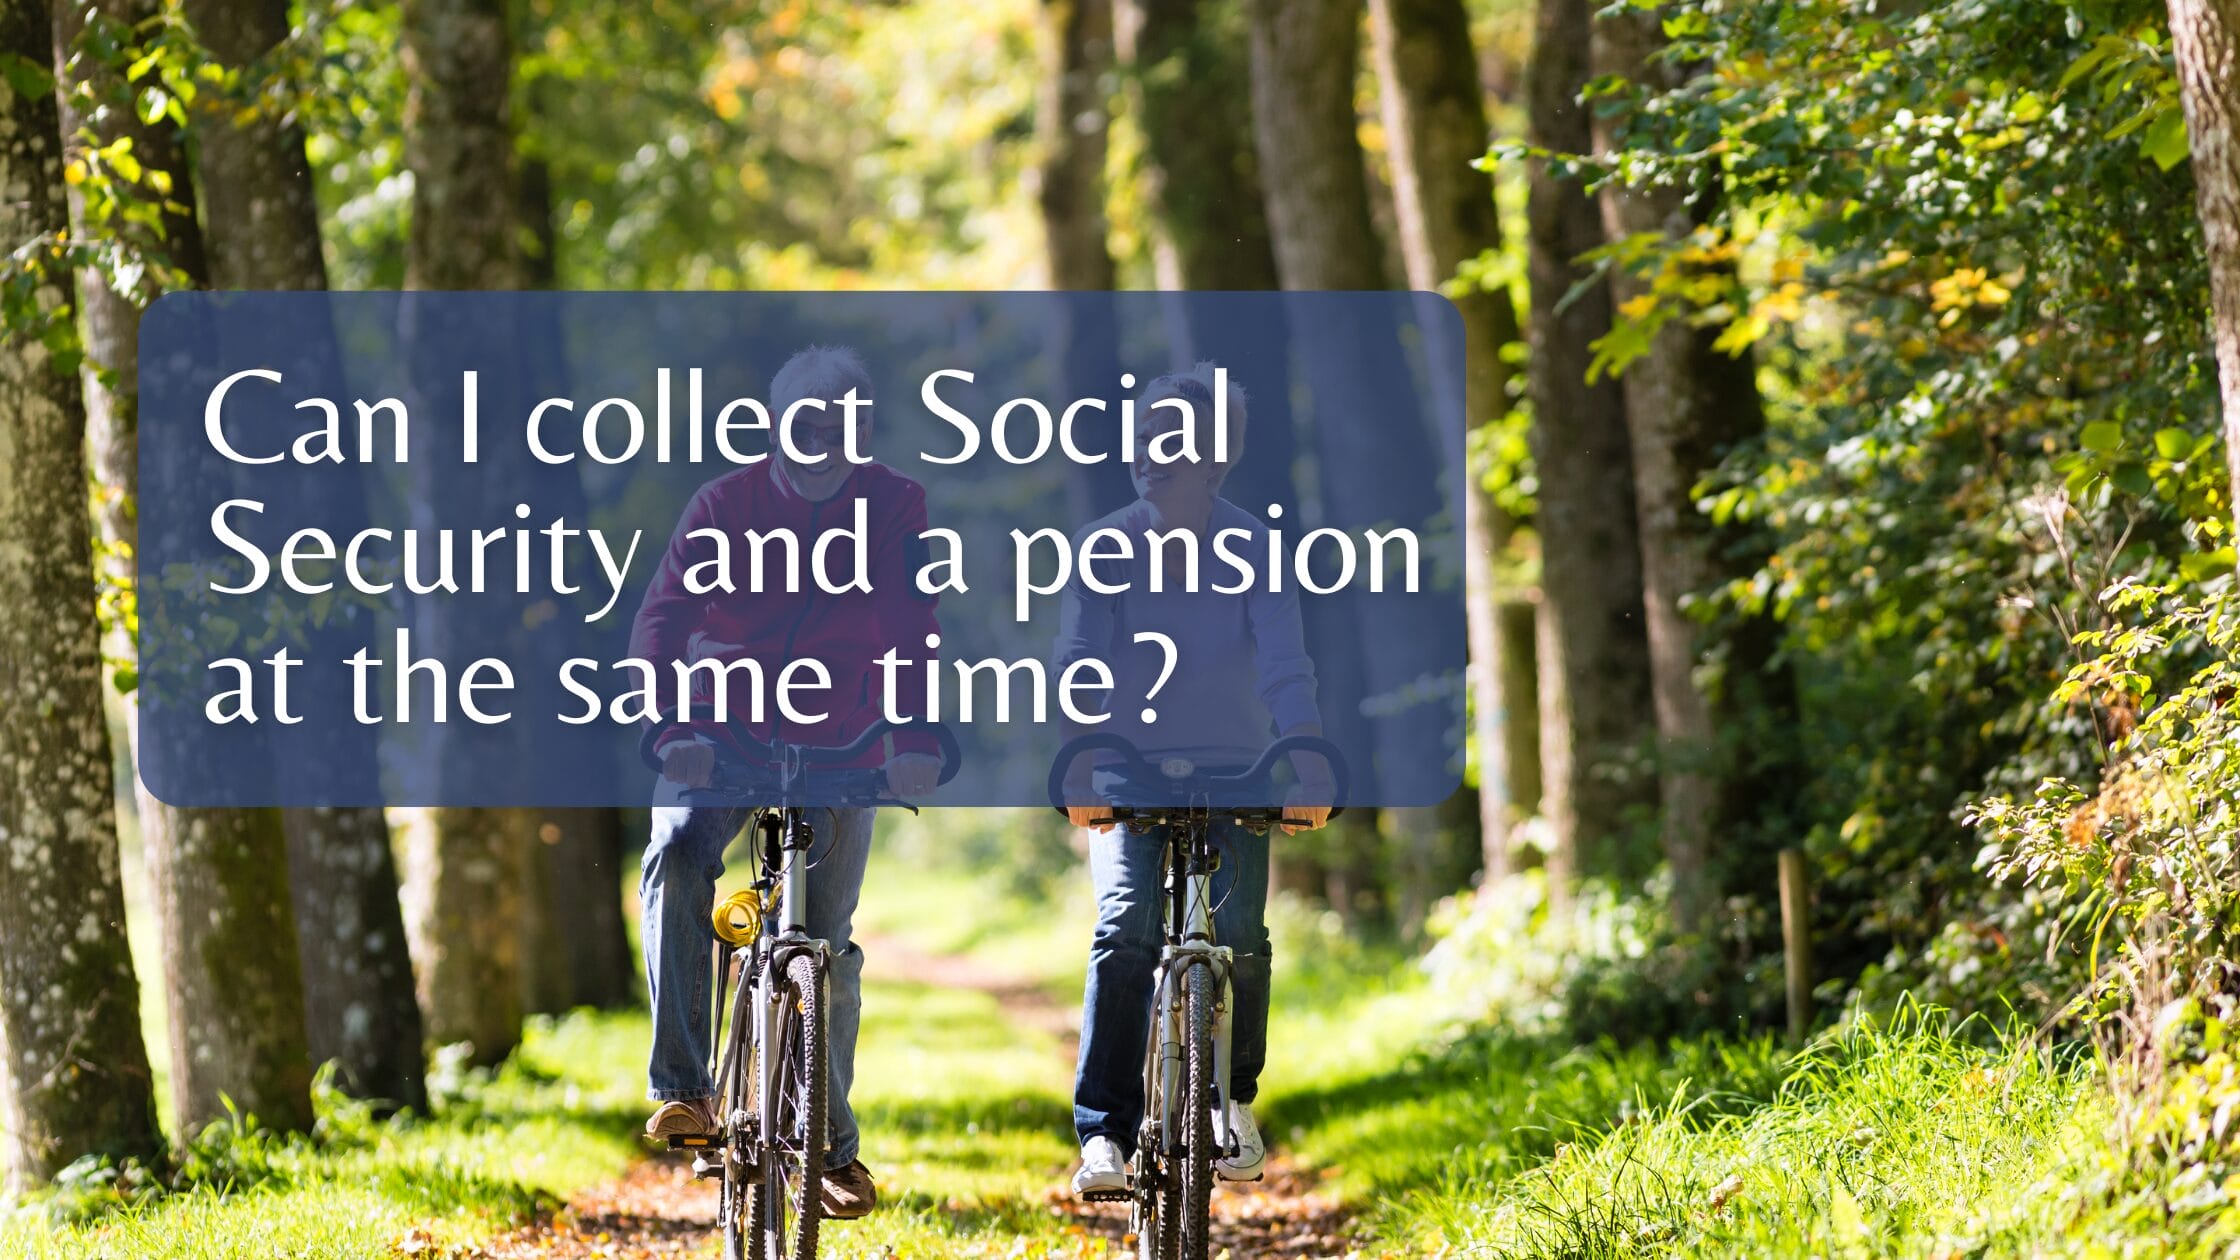 Can I collect Social Security and a pension at the same time?